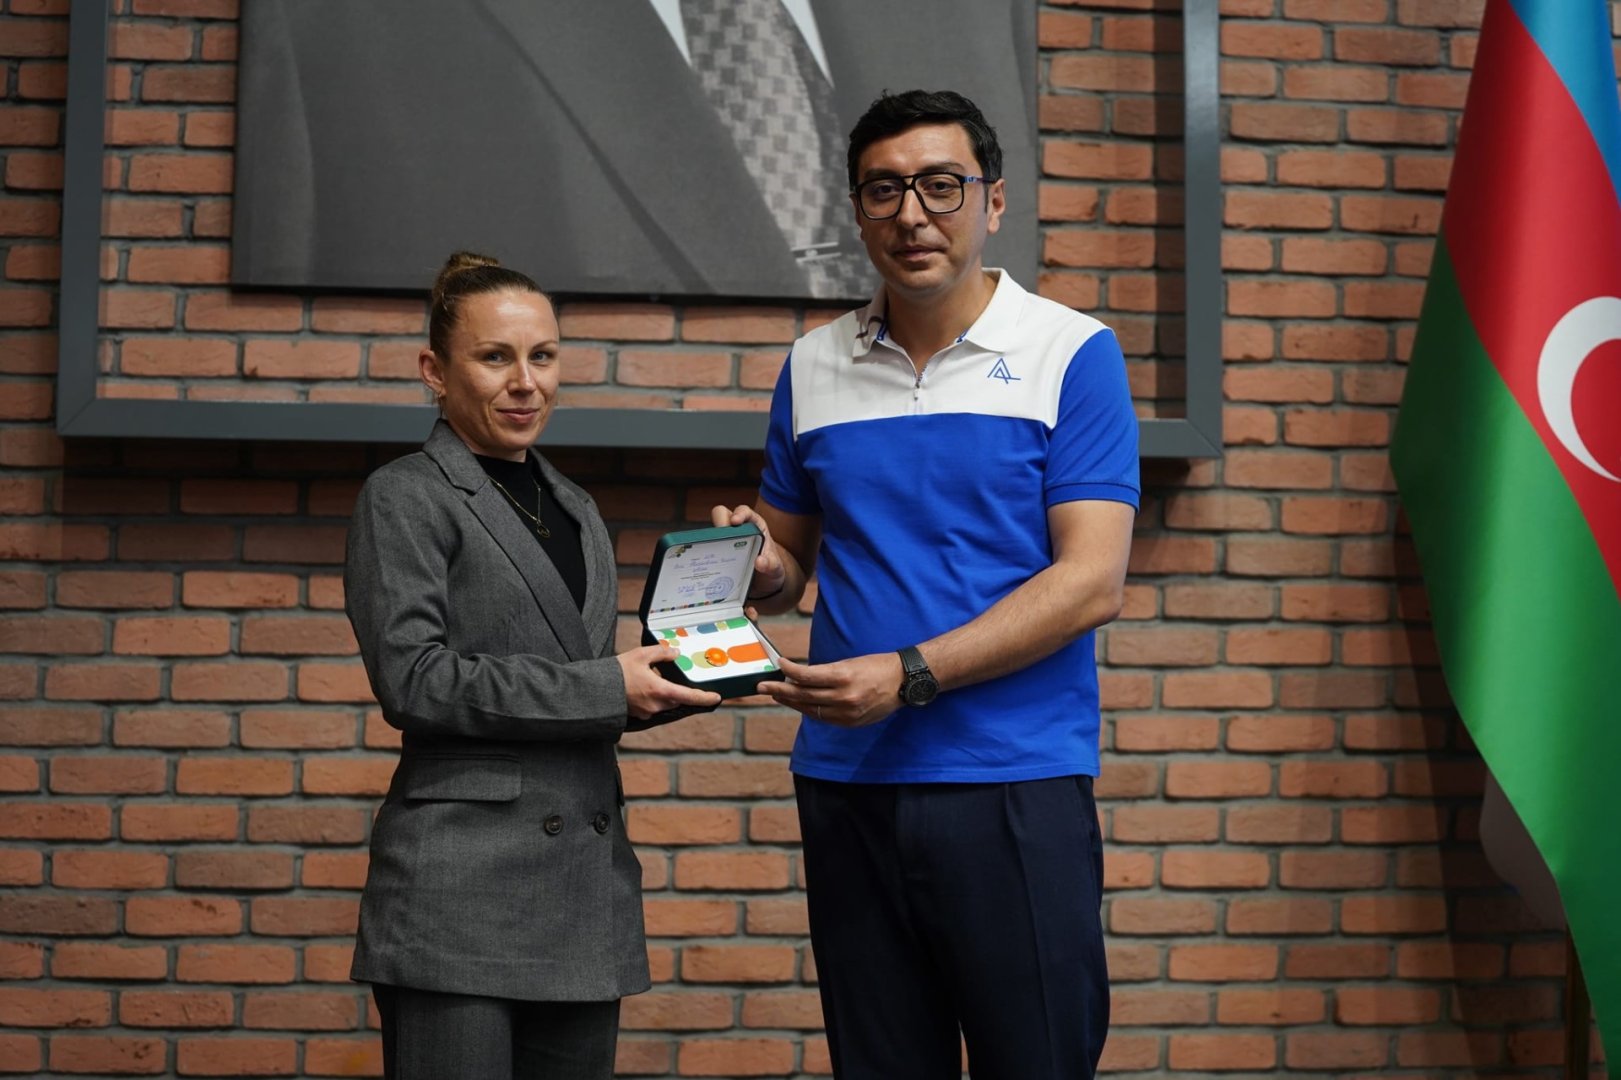 Azerbaijani sports minister meets with nation's top performing athletes (PHOTO)